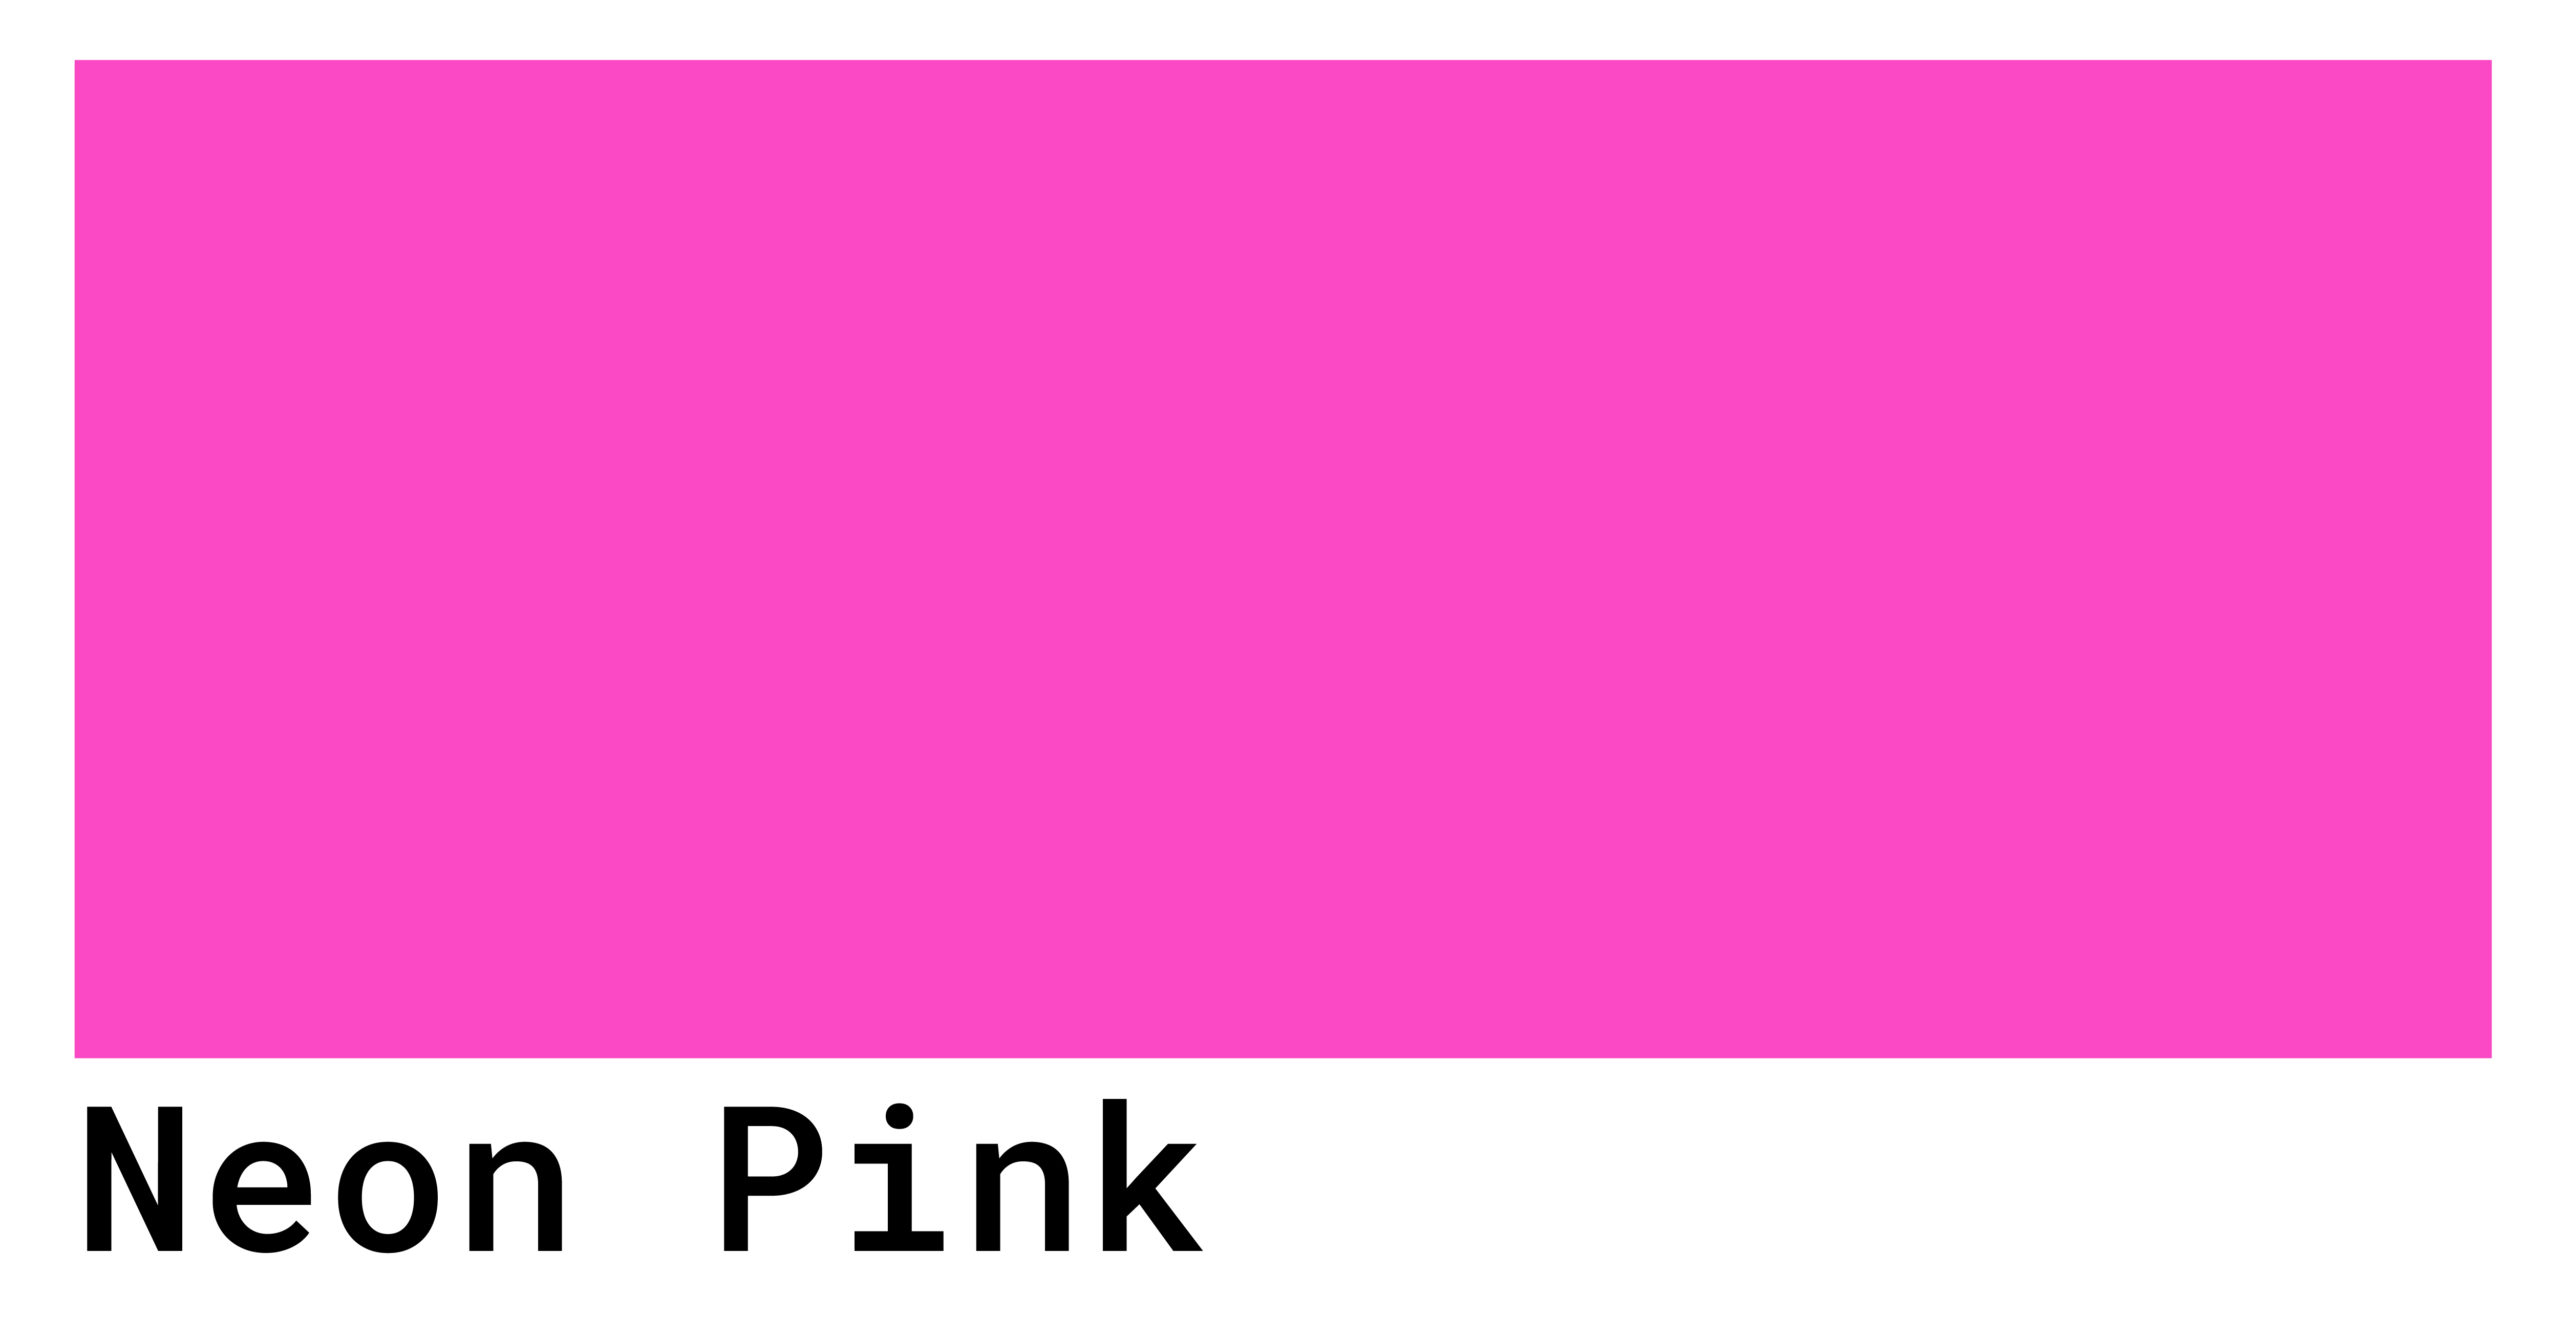 Dark Pink Color Codes - The Hex, RGB and CMYK Values That You Need